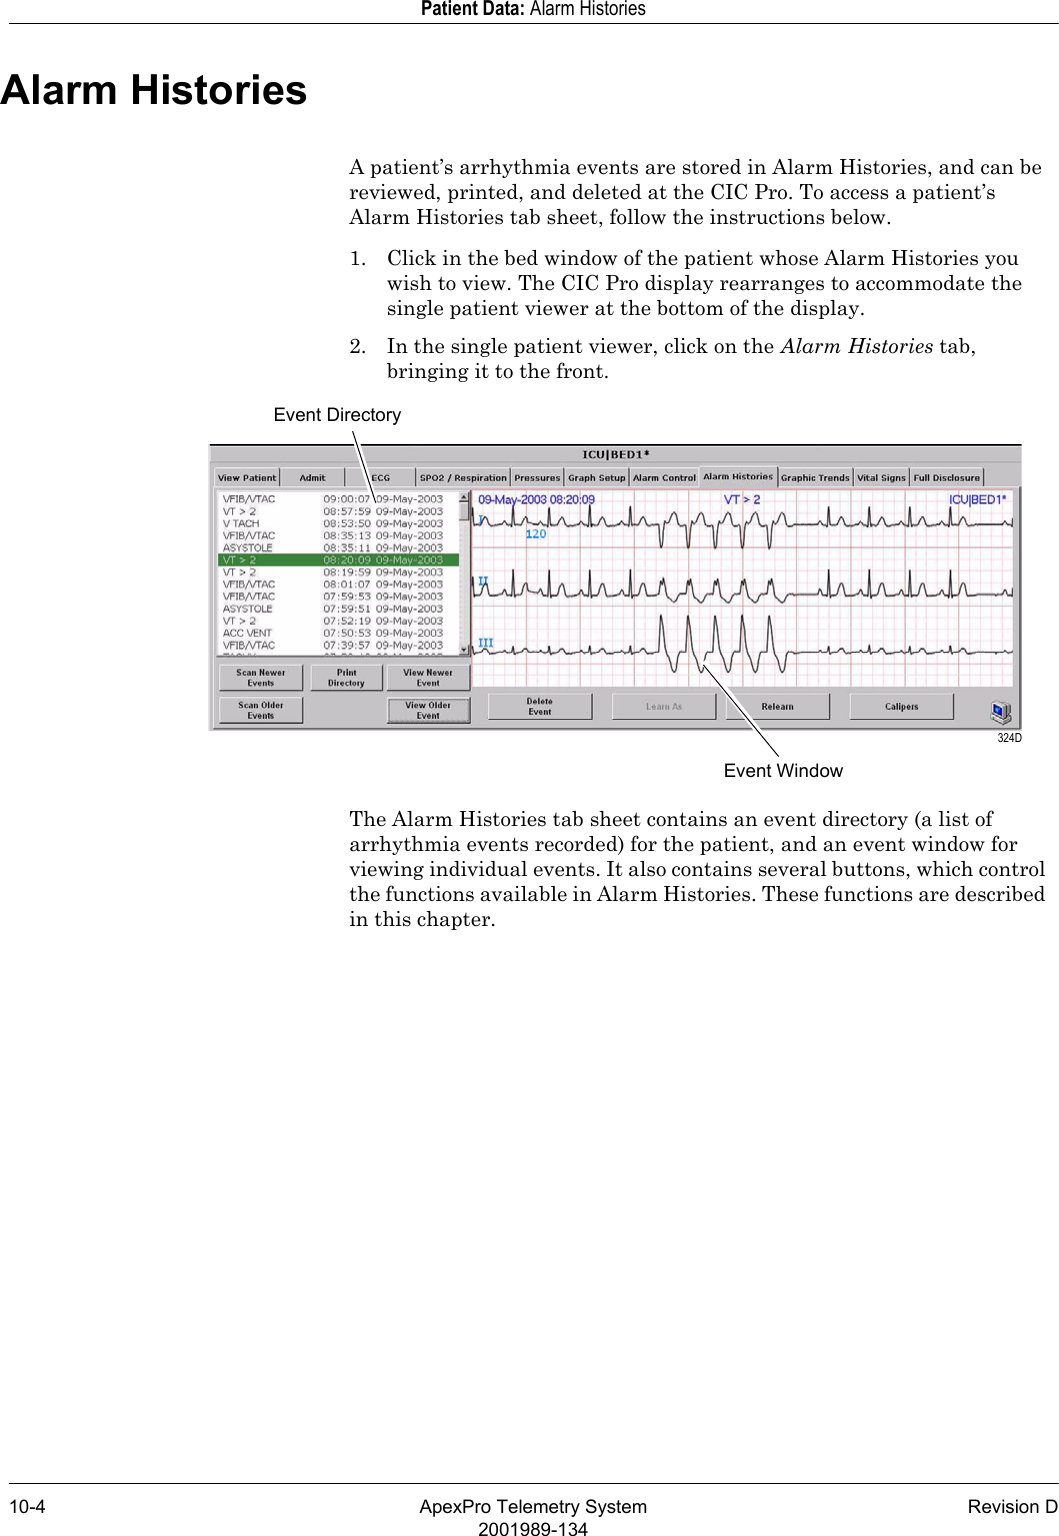 10-4 ApexPro Telemetry System Revision D2001989-134Patient Data: Alarm HistoriesAlarm HistoriesA patient’s arrhythmia events are stored in Alarm Histories, and can be reviewed, printed, and deleted at the CIC Pro. To access a patient’s Alarm Histories tab sheet, follow the instructions below.1. Click in the bed window of the patient whose Alarm Histories you wish to view. The CIC Pro display rearranges to accommodate the single patient viewer at the bottom of the display.2. In the single patient viewer, click on the Alarm Histories tab, bringing it to the front.The Alarm Histories tab sheet contains an event directory (a list of arrhythmia events recorded) for the patient, and an event window for viewing individual events. It also contains several buttons, which control the functions available in Alarm Histories. These functions are described in this chapter.Event DirectoryEvent Window 324D